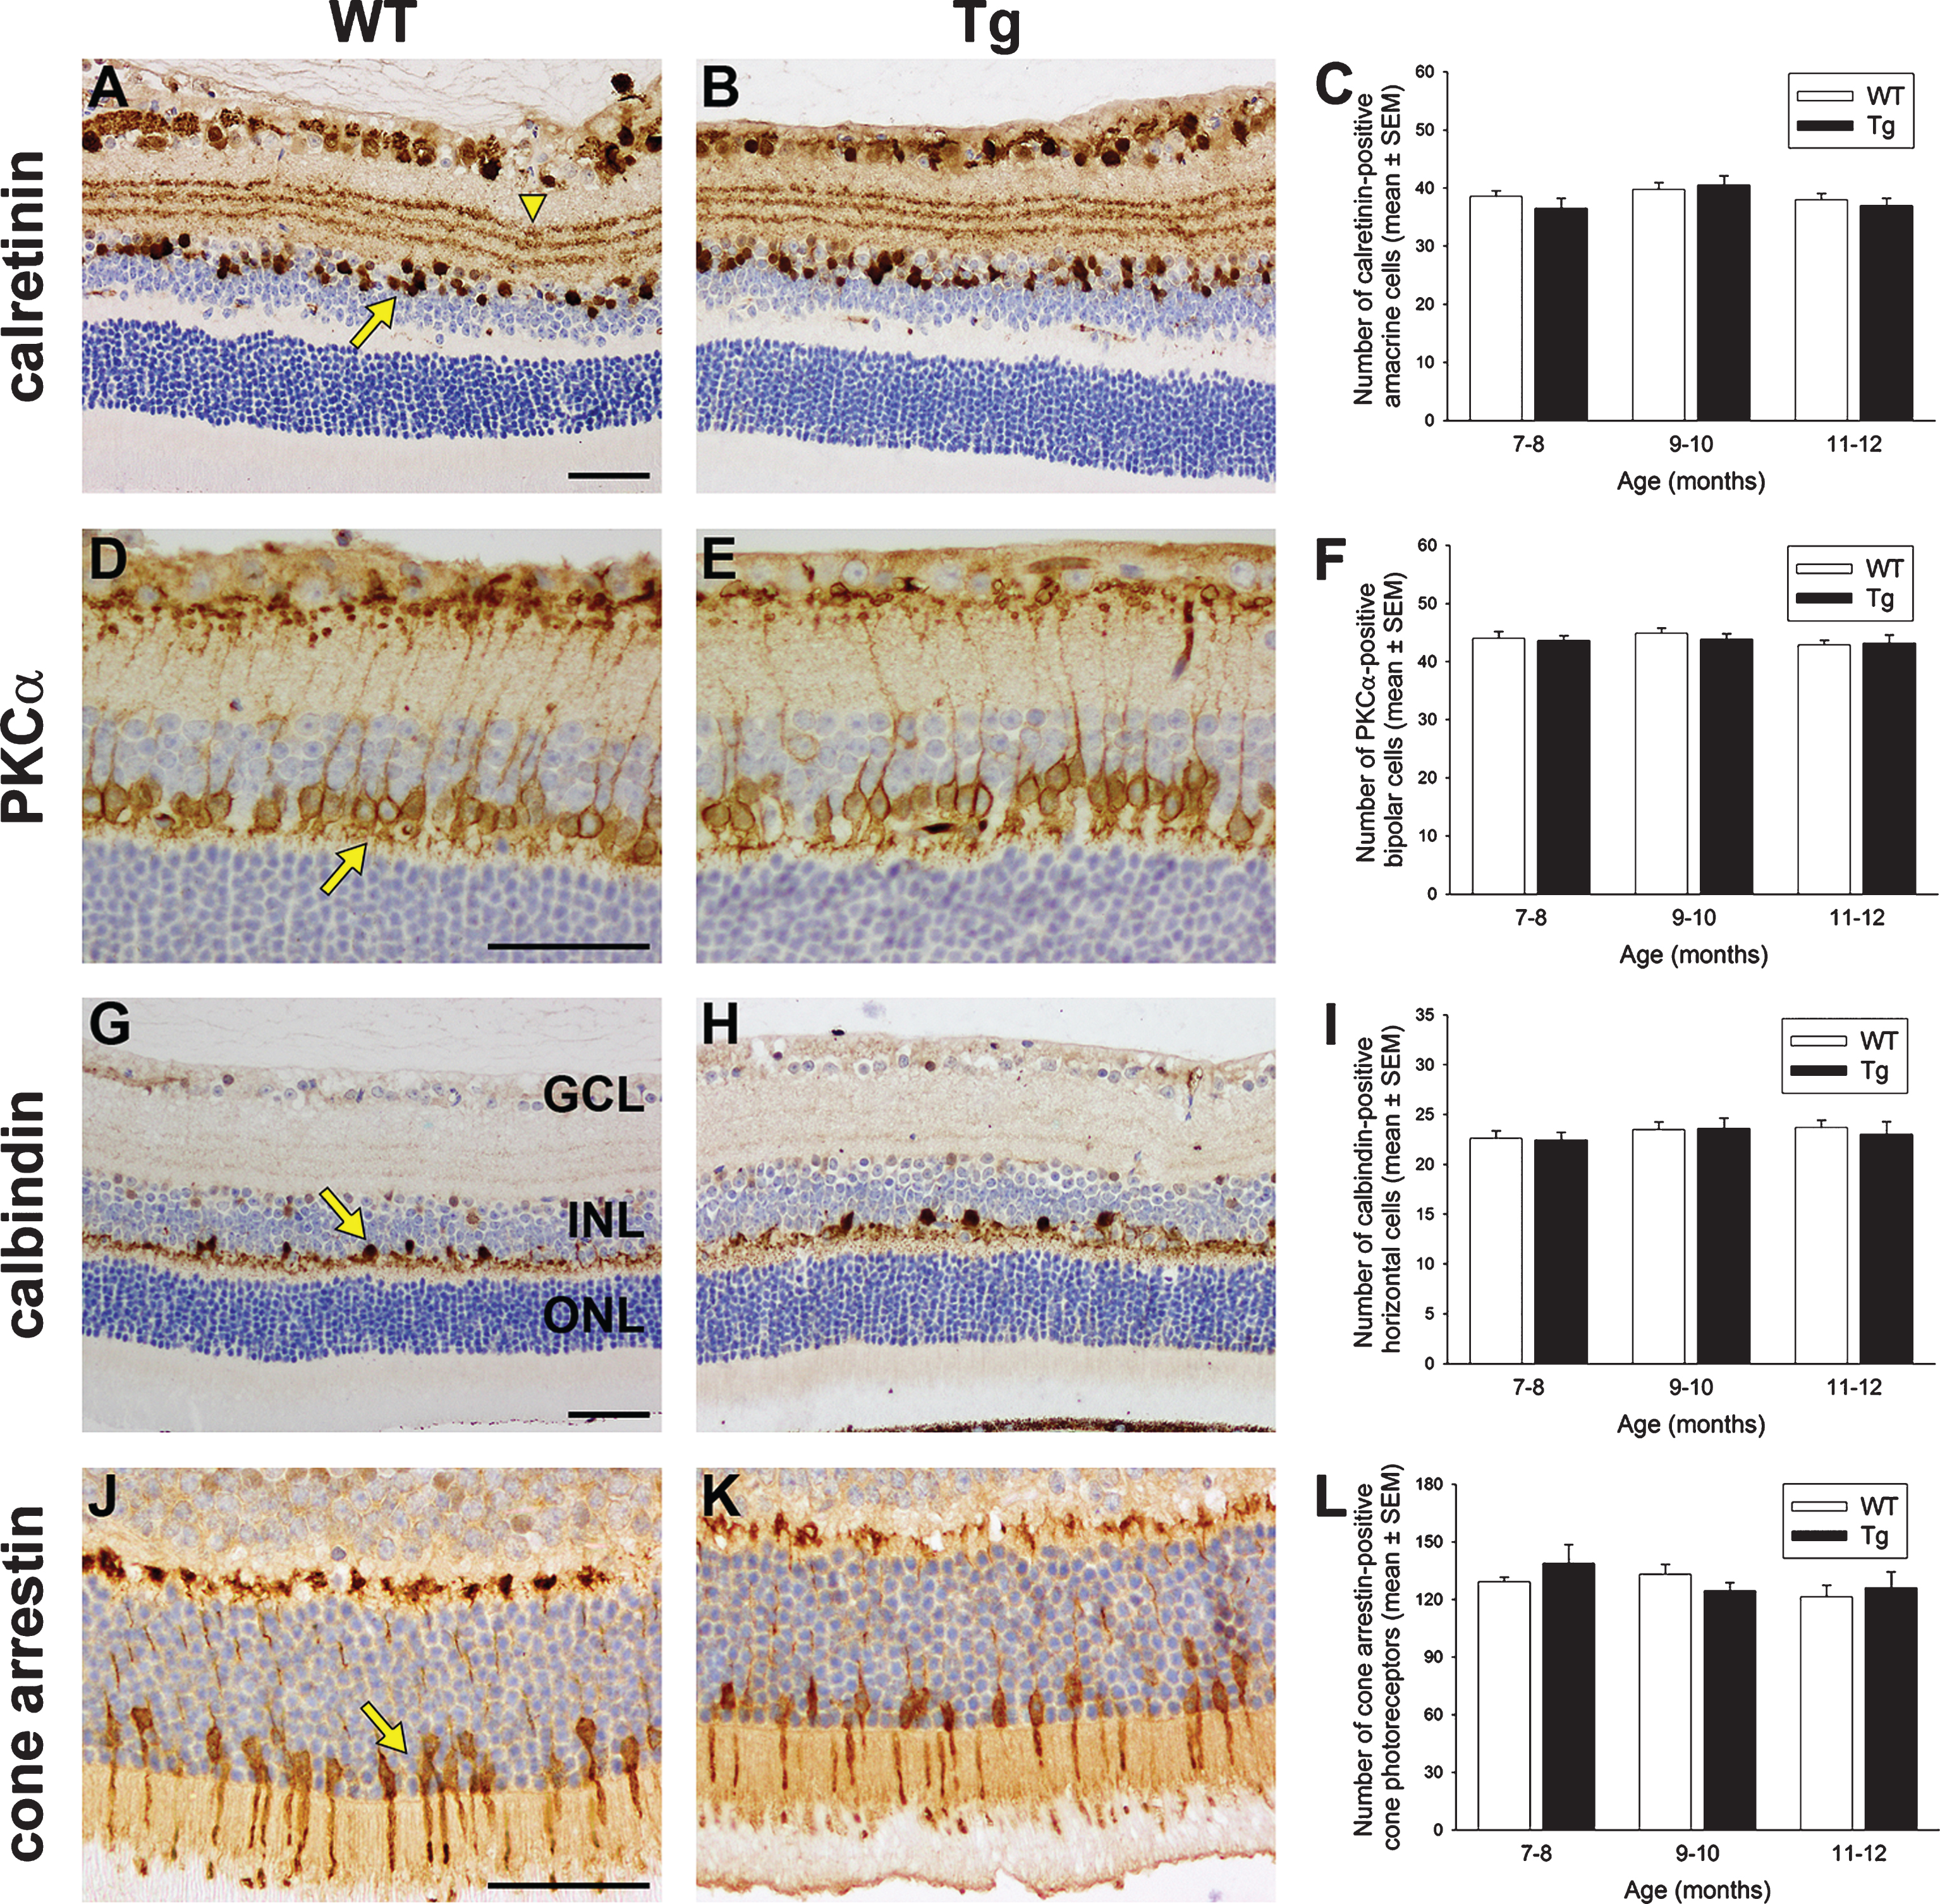 Analysis of amacrine cells, bipolar cells, horizontal cells, and cone photoreceptors in 7 to 12-month-old Tg retinas. Representative images of calretinin (A, B), PKCα (D, E), calbindin (G, H), and cone arrestin (J, K) immunolabeling are shown. Calretinin is associated with amacrine cell somata (arrow) located in the inner part of the INL, layers of terminals visible in the IPL (arrowhead), and displaced amacrine and ganglion cells in the GCL. PKCα labels bipolar cell somata (arrow) located in the INL and their processes that synapse with photoreceptors and retinal ganglion cells. Calbindin is associated with horizontal cell somata (arrow) located in the outer part of the INL and their dendrites in the outer plexiform layer. Cone arrestin labels cone photoreceptor cell bodies (arrow) located in the ONL, inner and outer cone segments, and synapses in the outer plexiform layer. Quantification of numbers of calbindin-labeled horizontal cells (C), calretinin-labeled amacrine cells (F), PKCα-labeled bipolar cells (I), and cone arrestin-labeled cone photoreceptors (L) are also shown. In each case, data are expressed as mean±SEM, where n = 10 for each age-matched group. Student’s unpaired t-tests revealed no significant differences between the treatment groups at any of the three age groups for any of the four cell types. Scale bars: 50 μm. GCL, ganglion cell layer; INL, inner nuclear layer; ONL, outer nuclear layer.